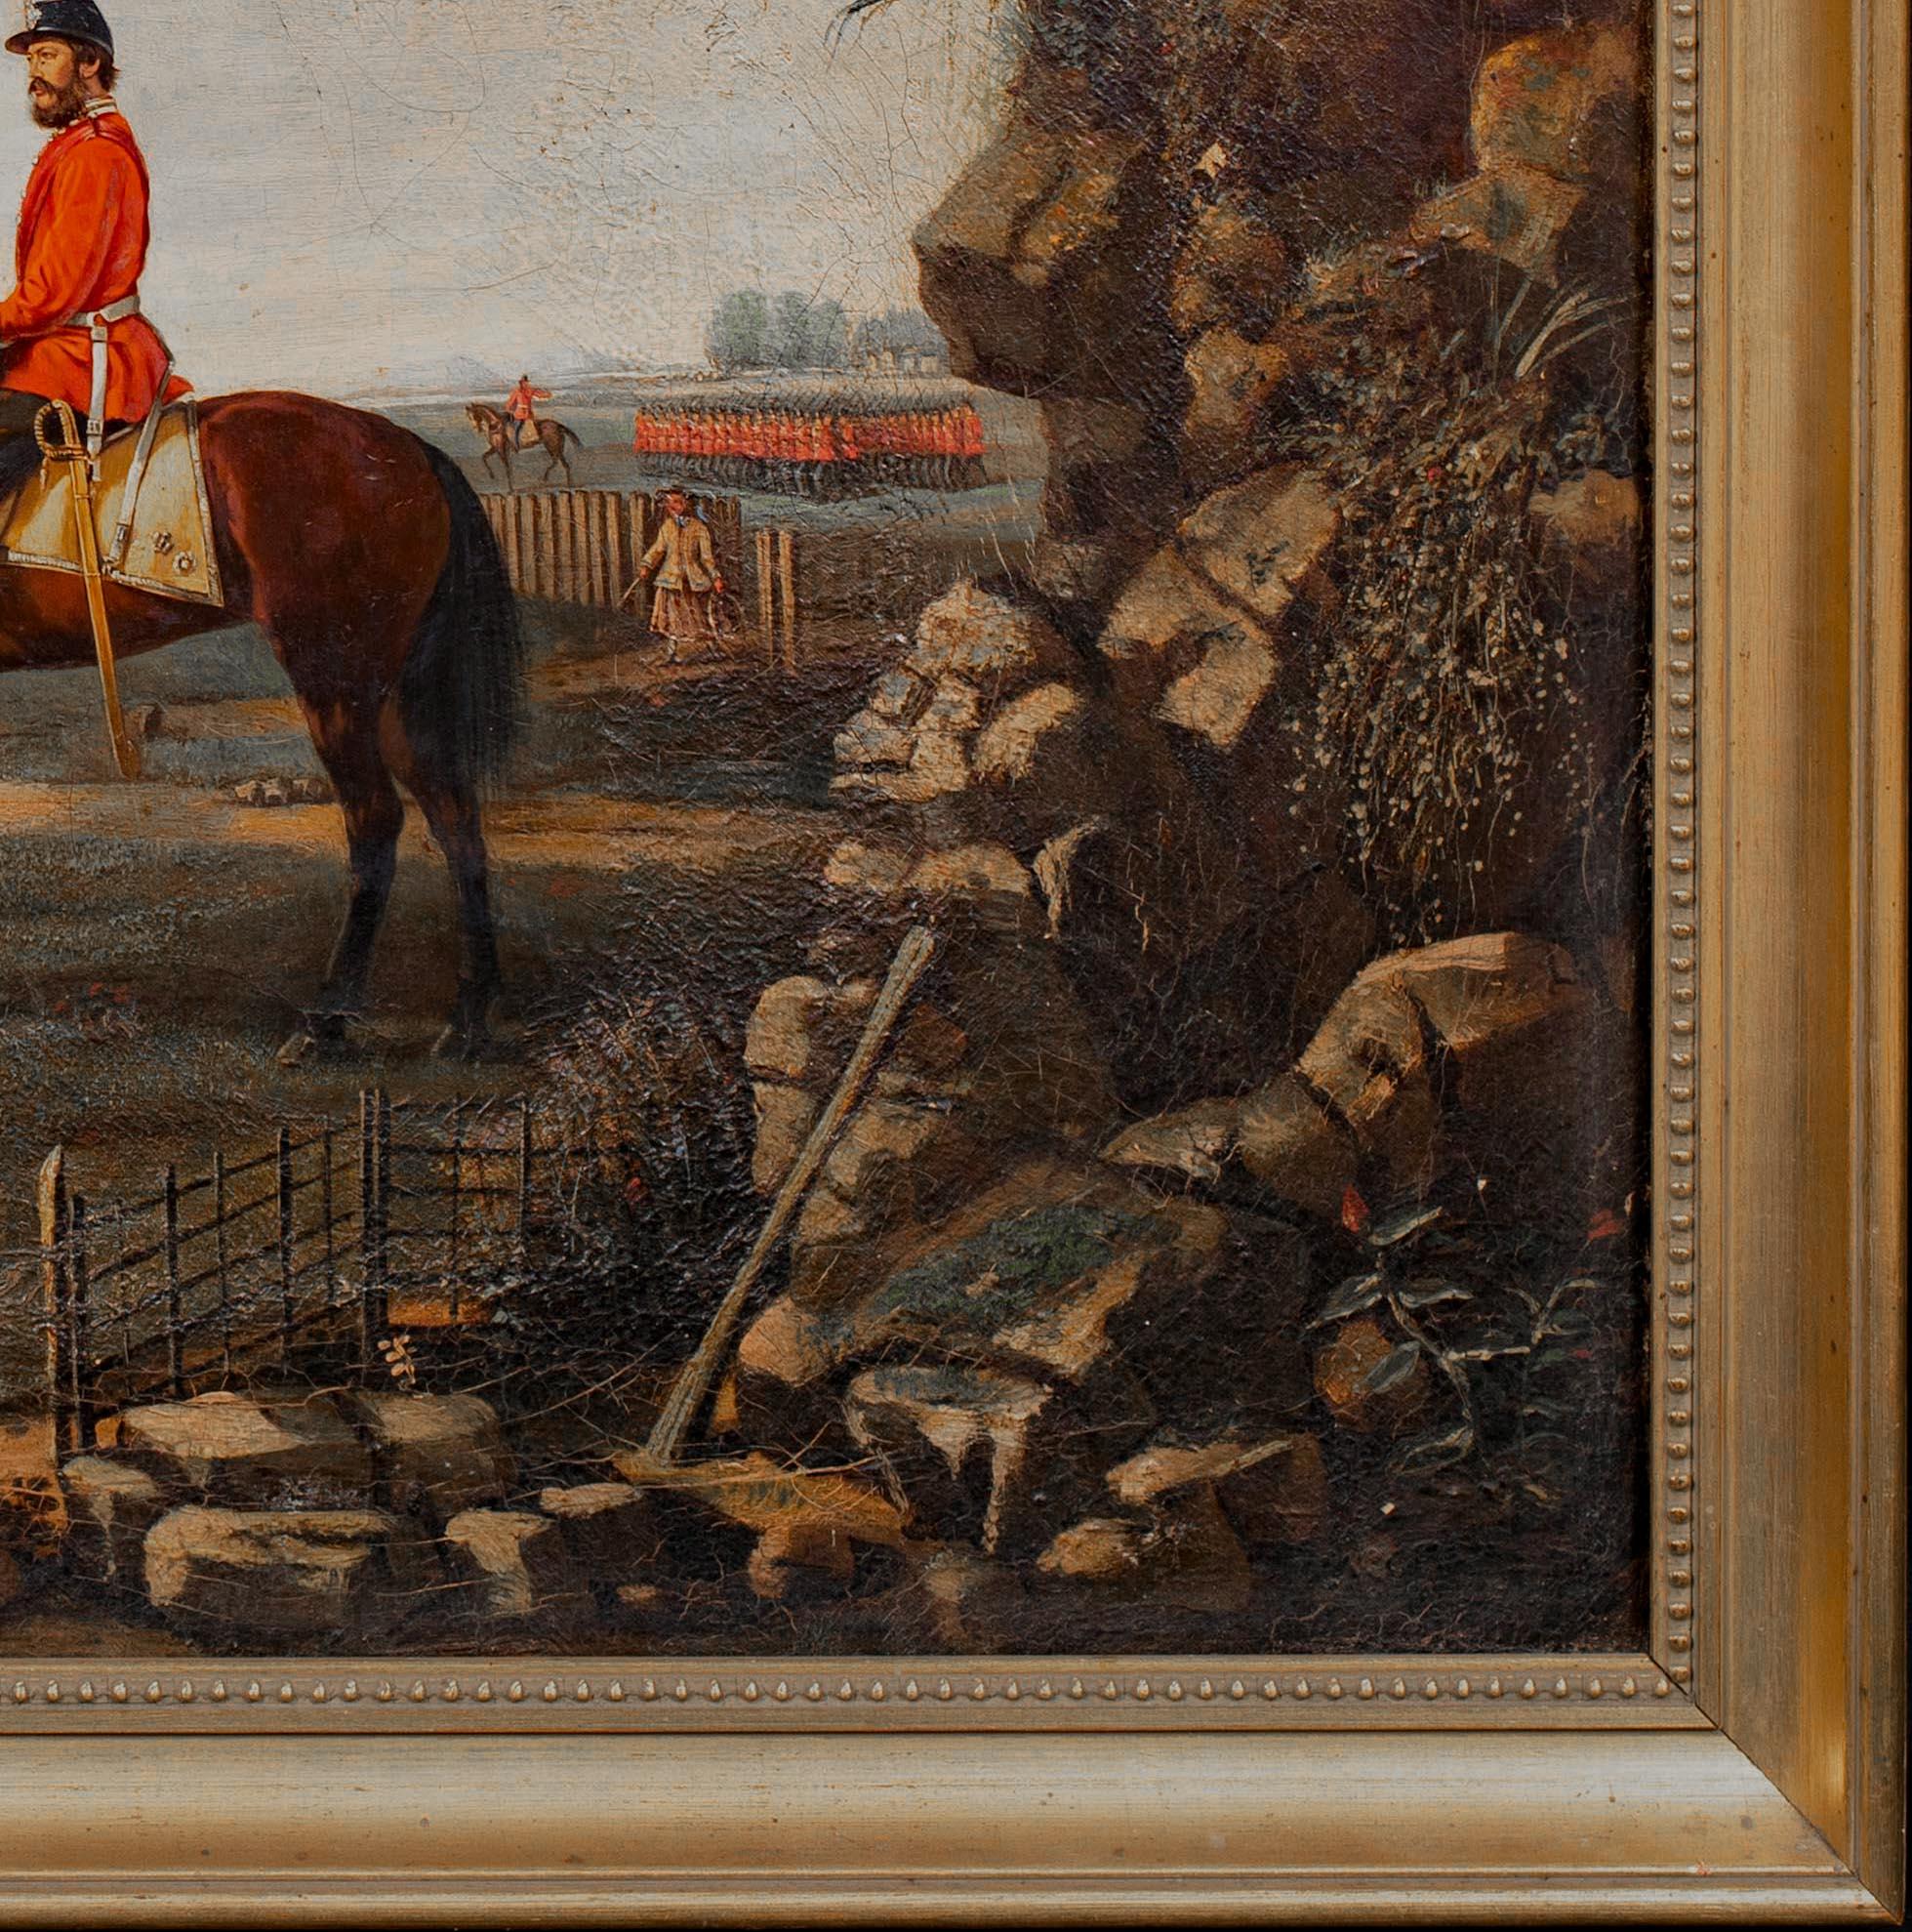 Garibaldi Redshirts Encampment, 19th Century

attributed to Remigio Legat (19th century Italian)

Large 19th century landscape of Garibaldi's Redshirt in camp with an officer in the foreground, oil on canvas. Excellent quality rare circa 1860